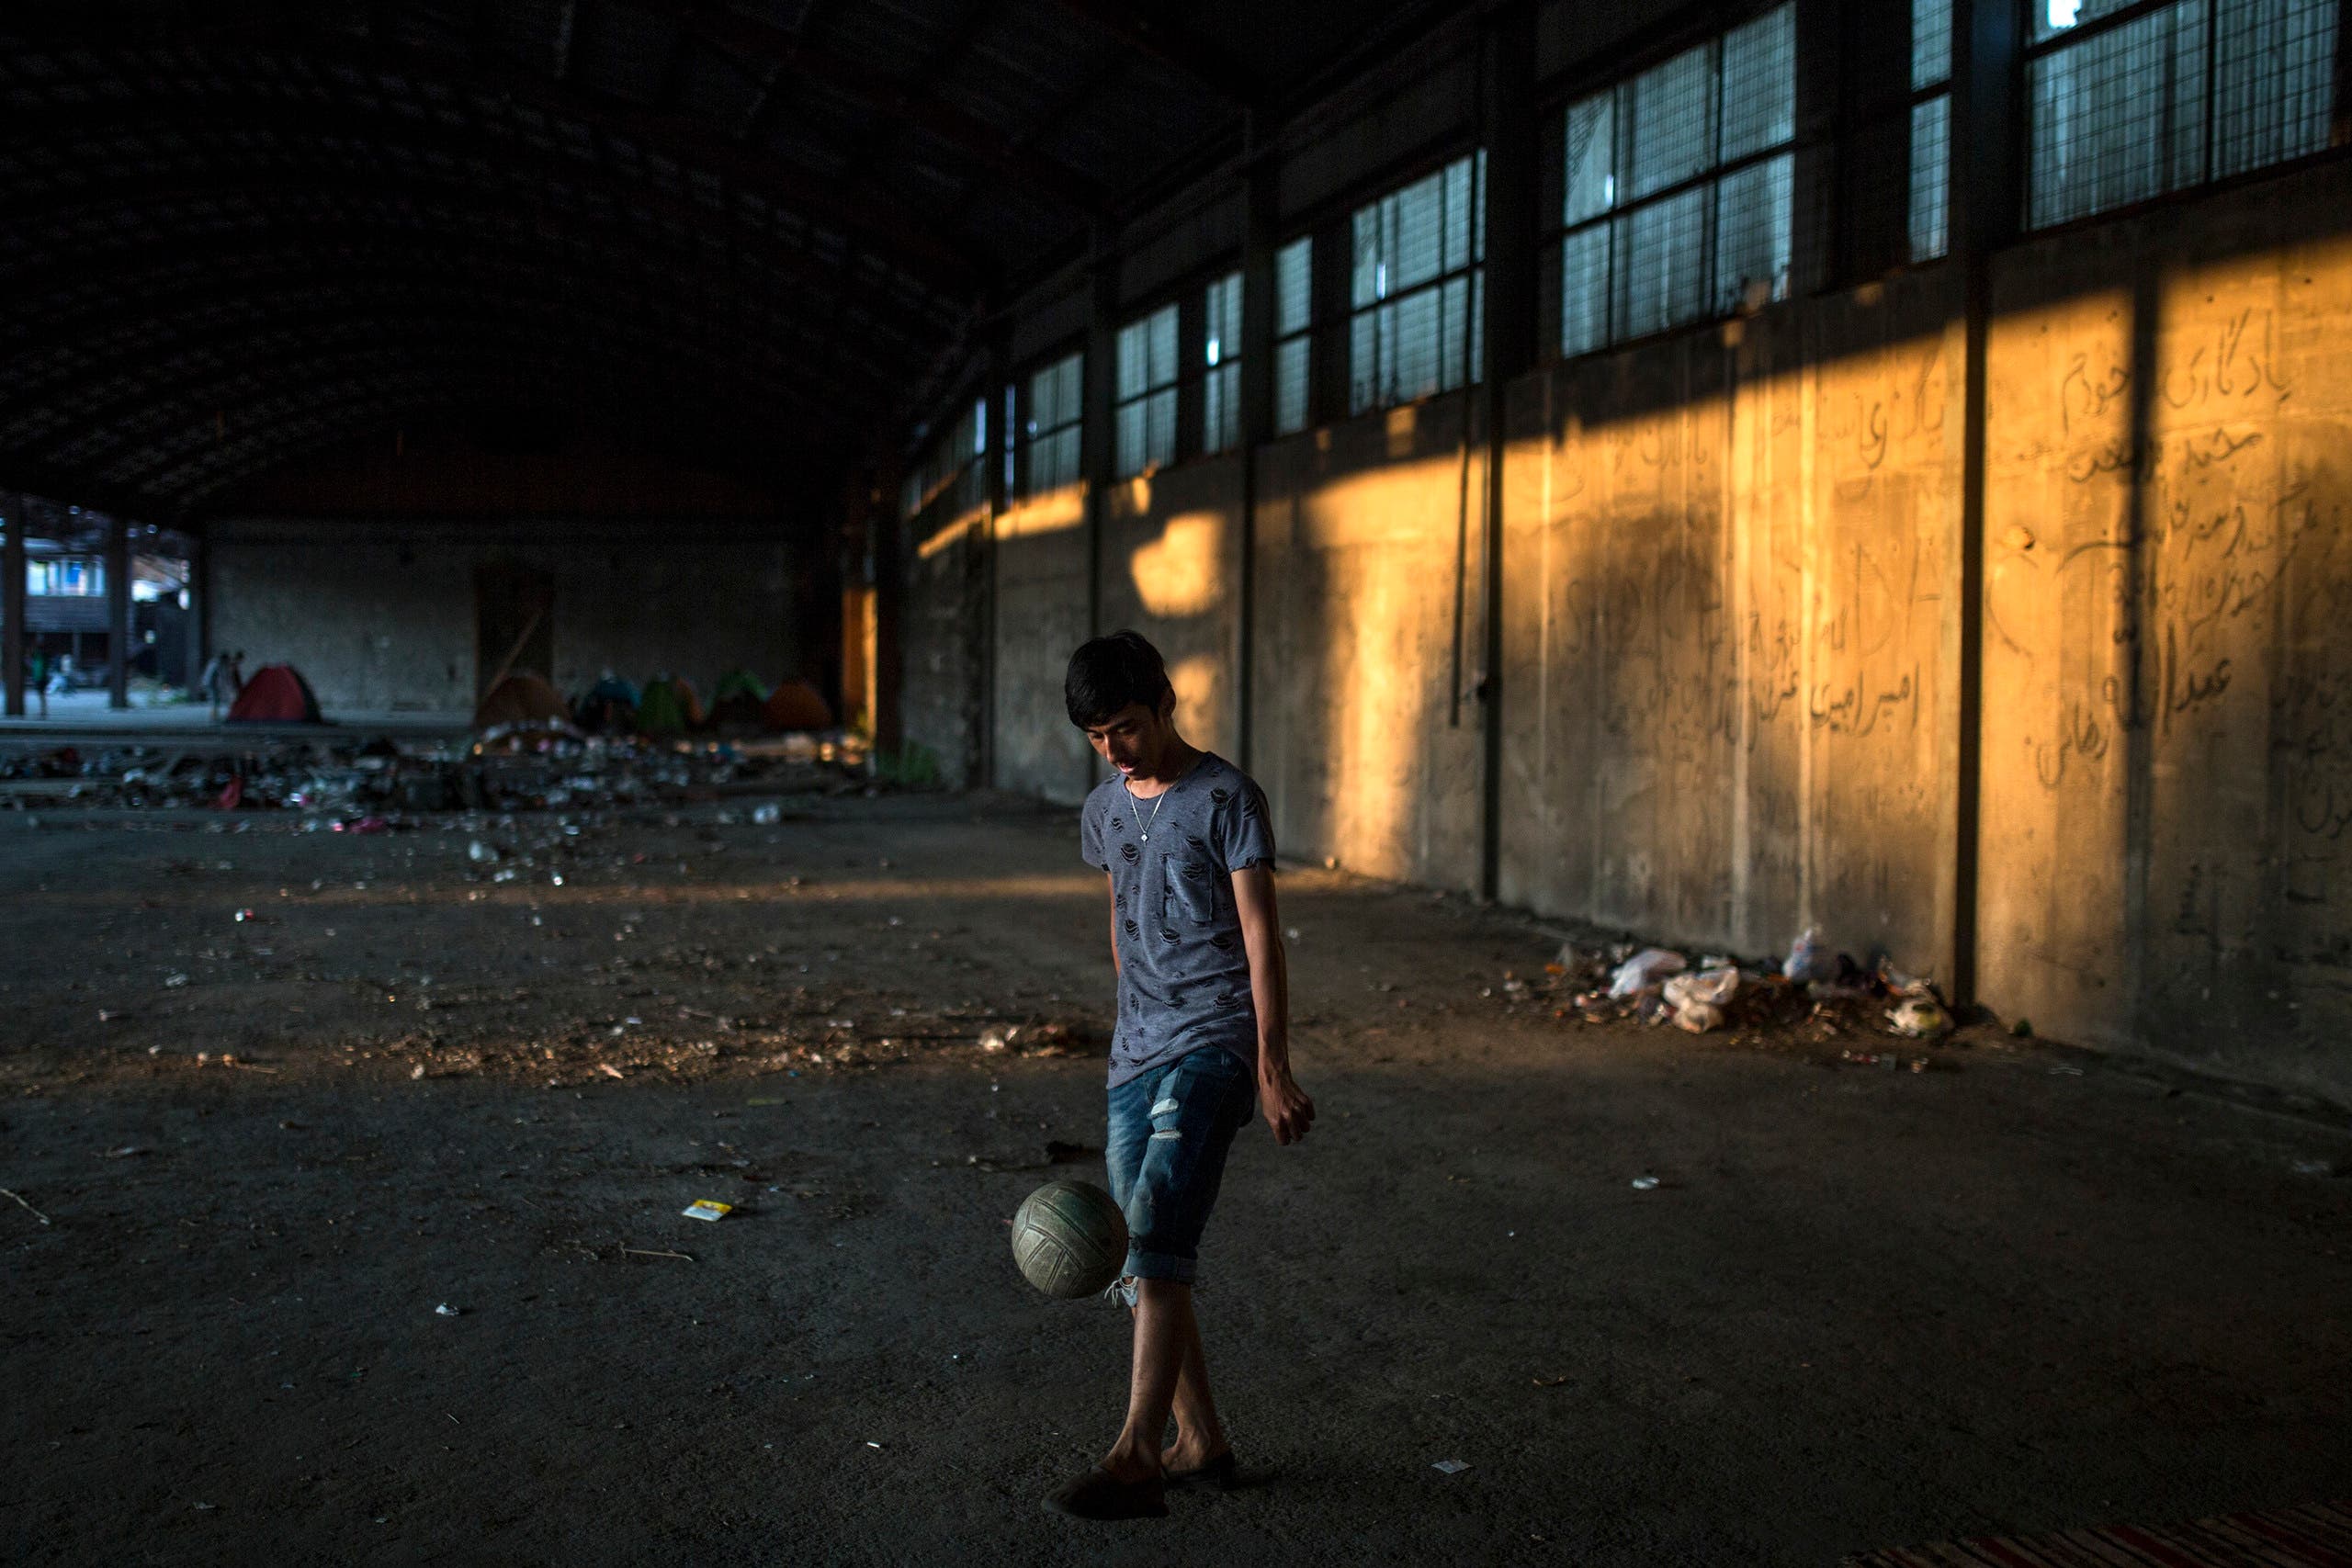 Migrants find shelter in an abandoned factory in Greece 